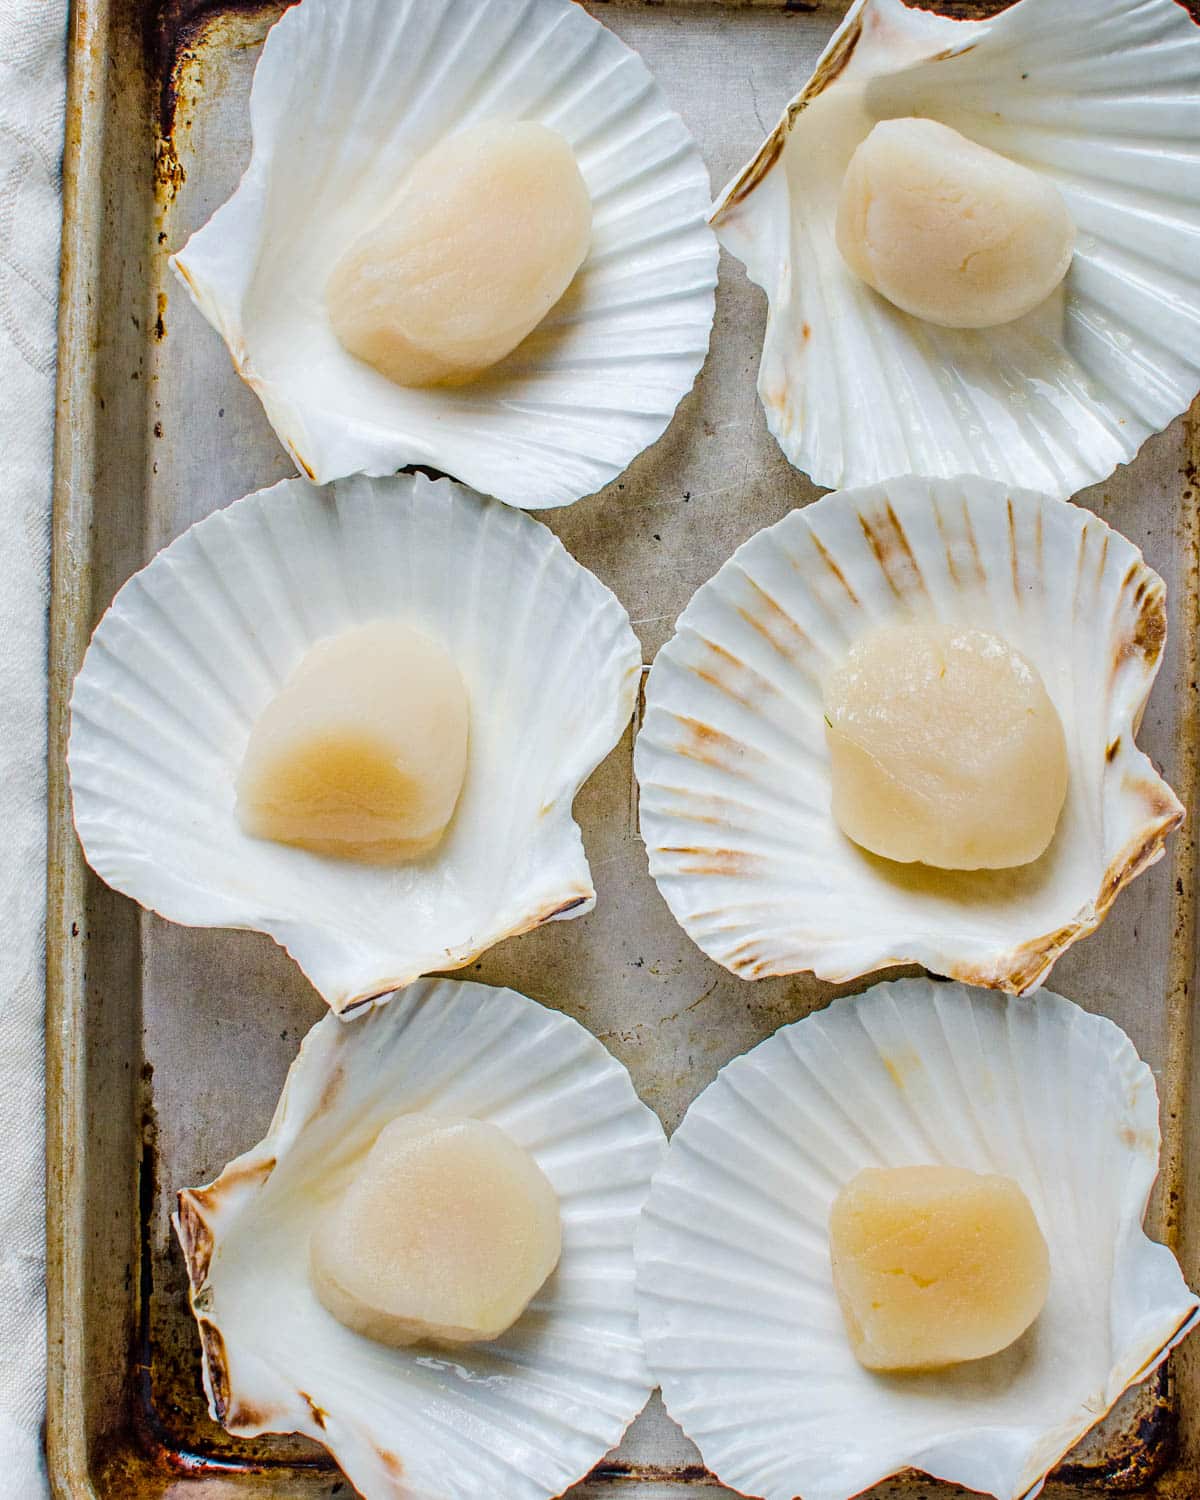 Placing one scallop into individual scallop shells.